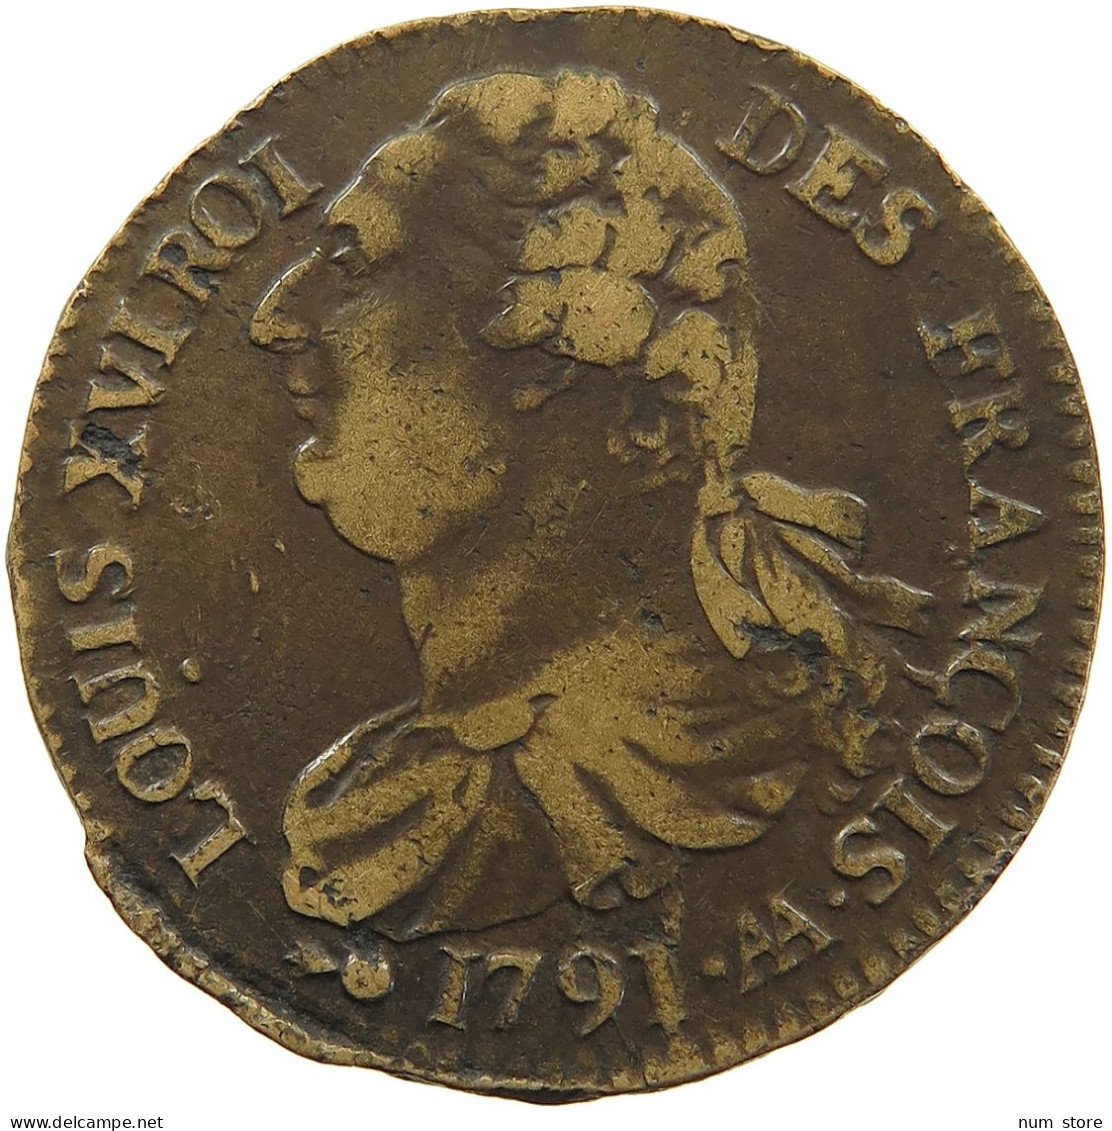 FRANCE 2 SOLS 1791 AA Louis XVI. (1774-1793) RARE #t006 0017 - 1791-1792 Constitution (An I)